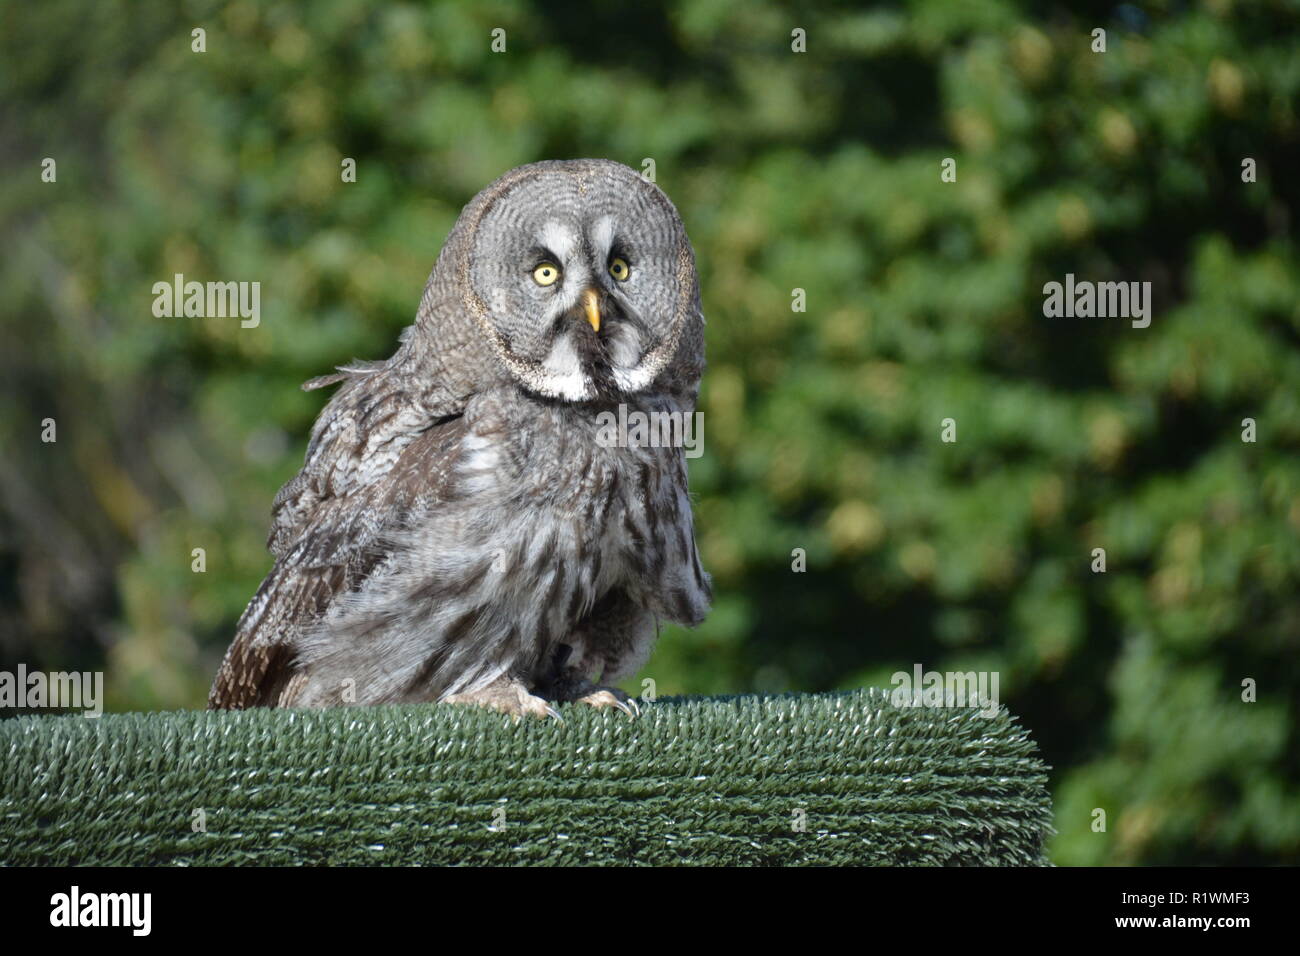 Strix nebulosa full body daily picture with green trees background Stock Photo